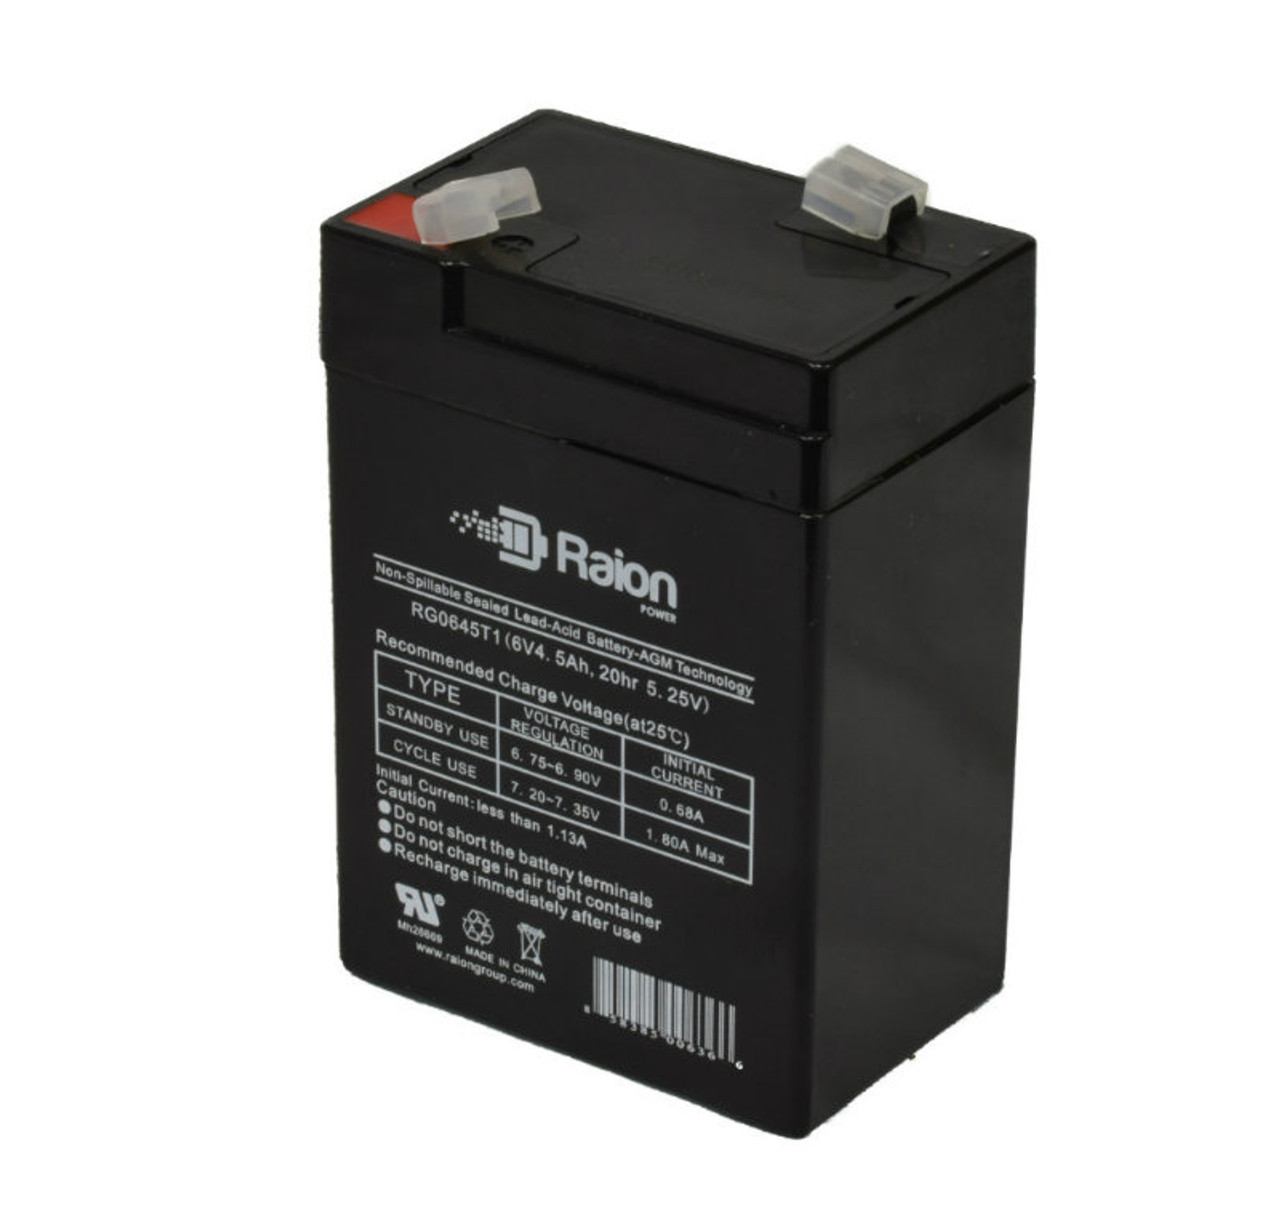 Raion Power RG0645T1 6V 4.5Ah Replacement Battery Cartridge for RS Pro 537-5422